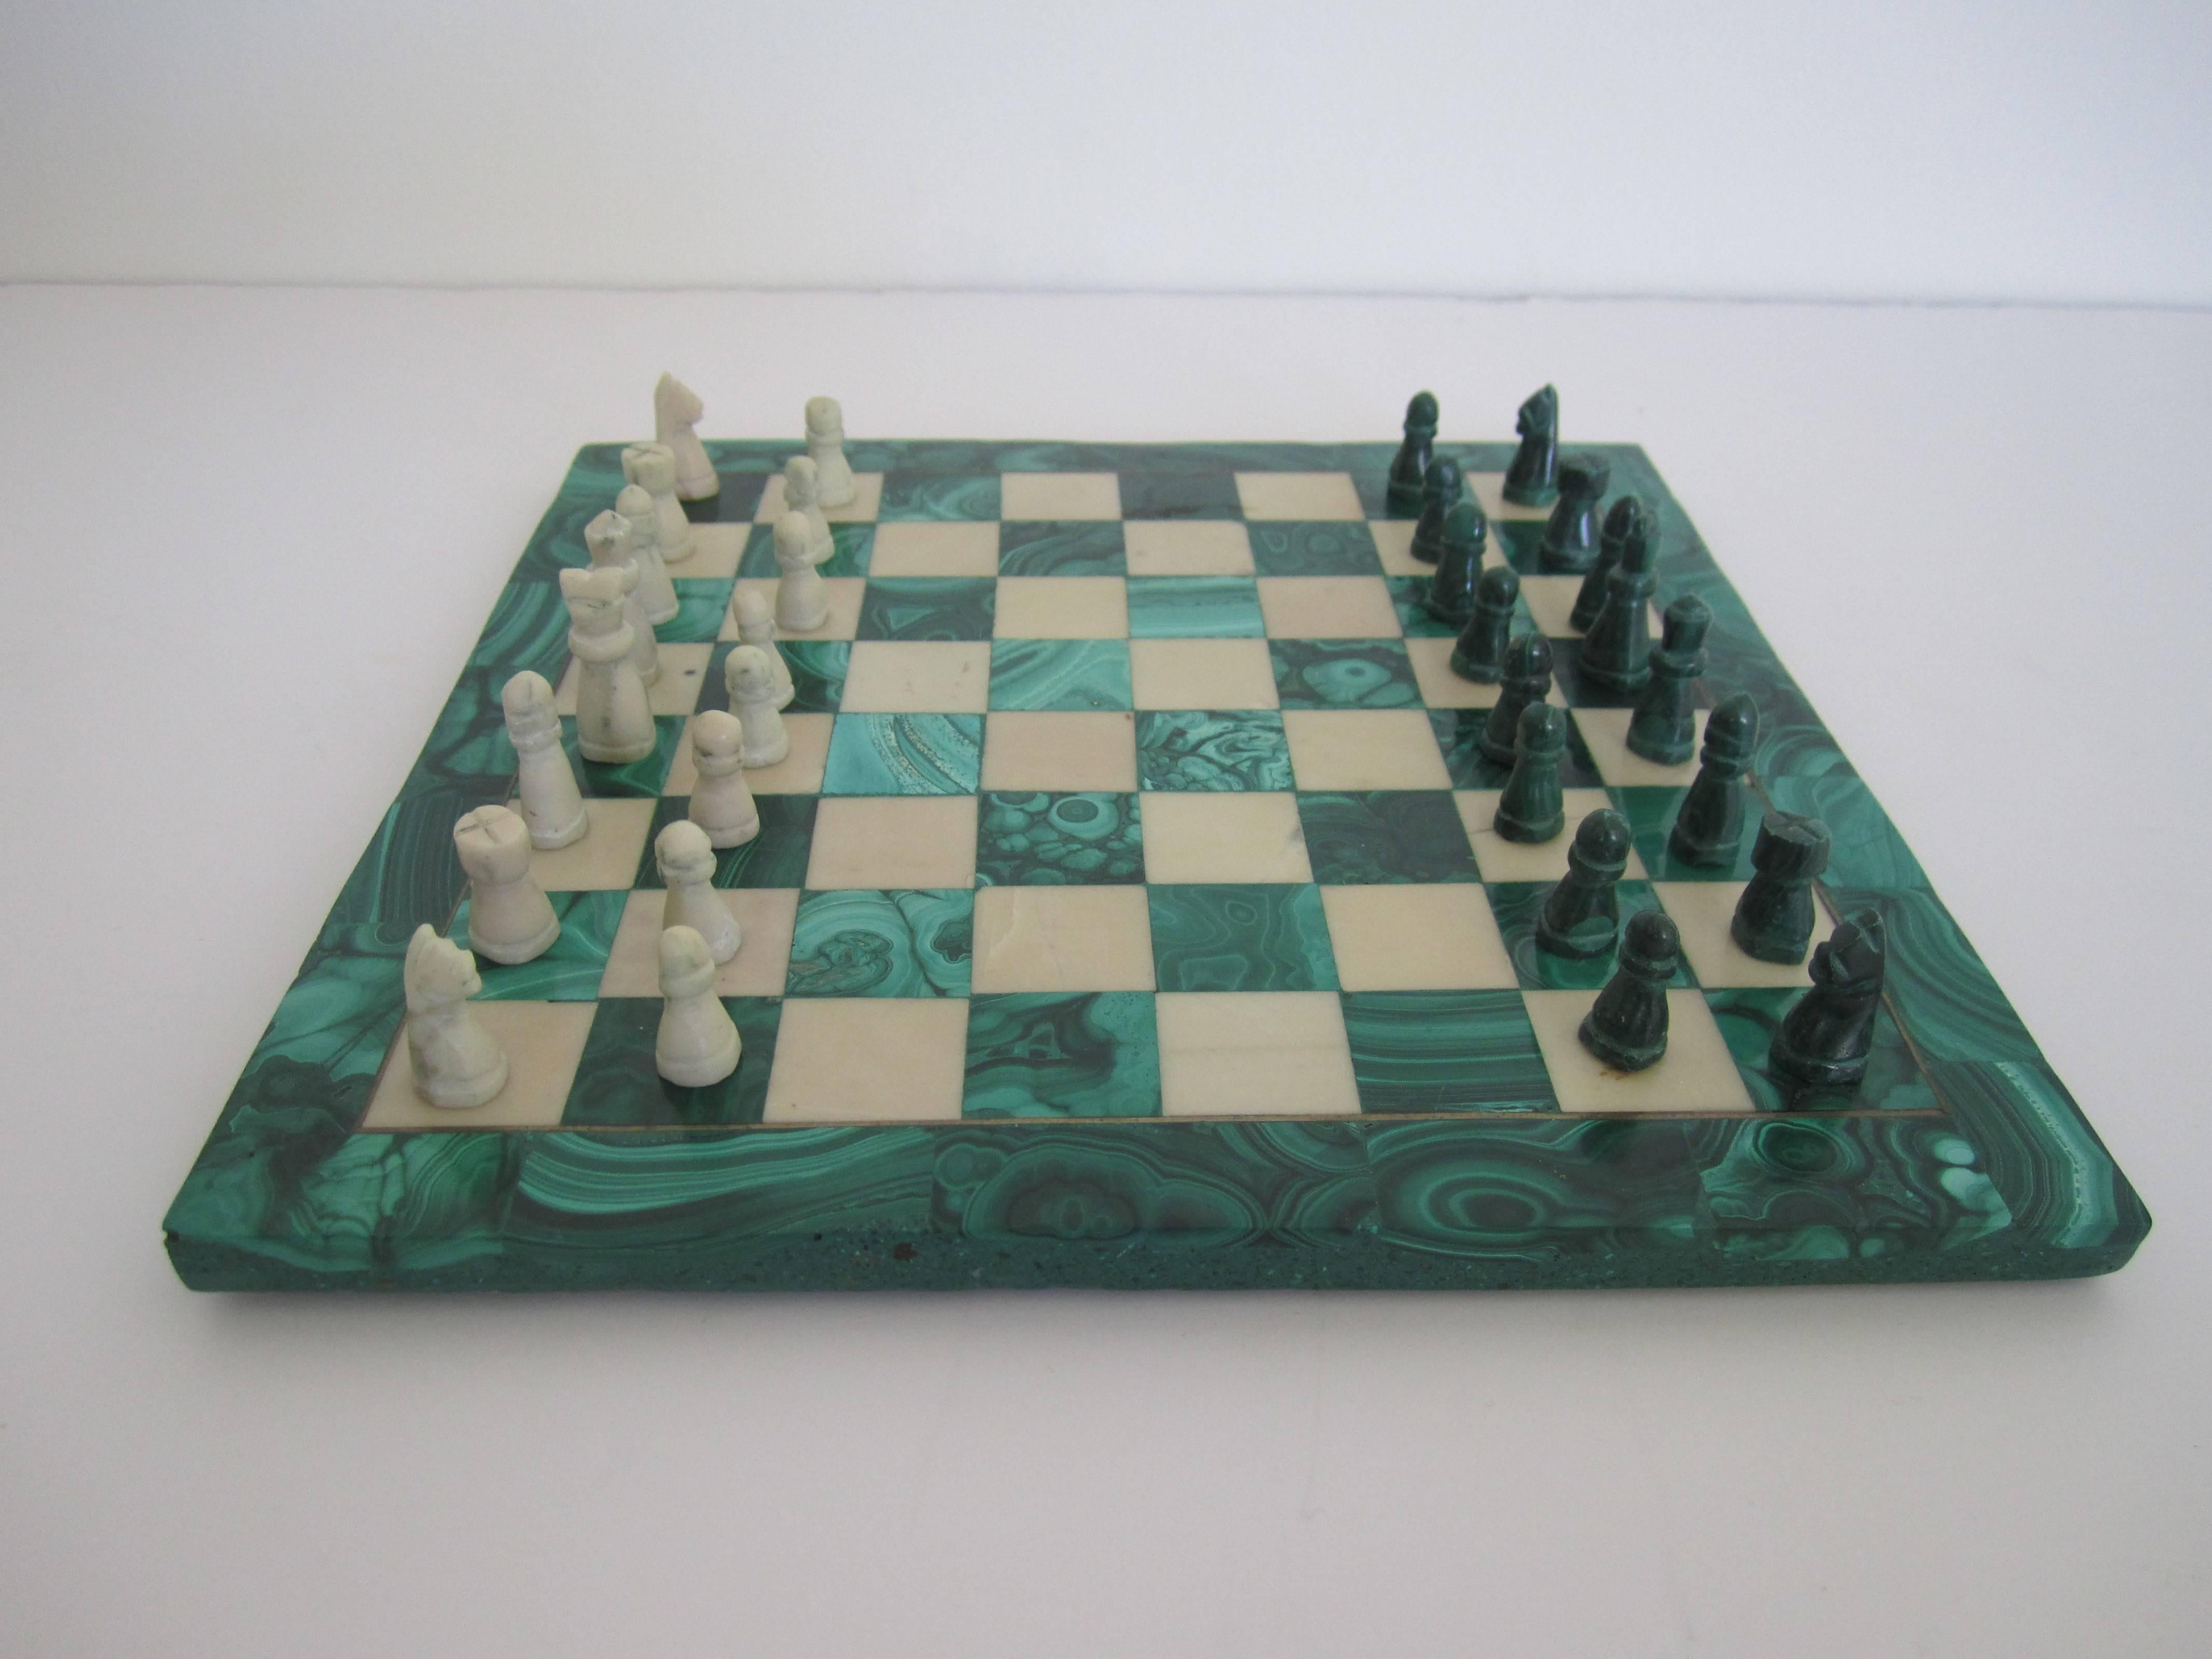 A vintage green malachite and marble chess set. Game board is made of green malachite and marble. Green and white game pieces are all hand-carved. All pieces accounted for; 32 + board. Board measures approximately 9